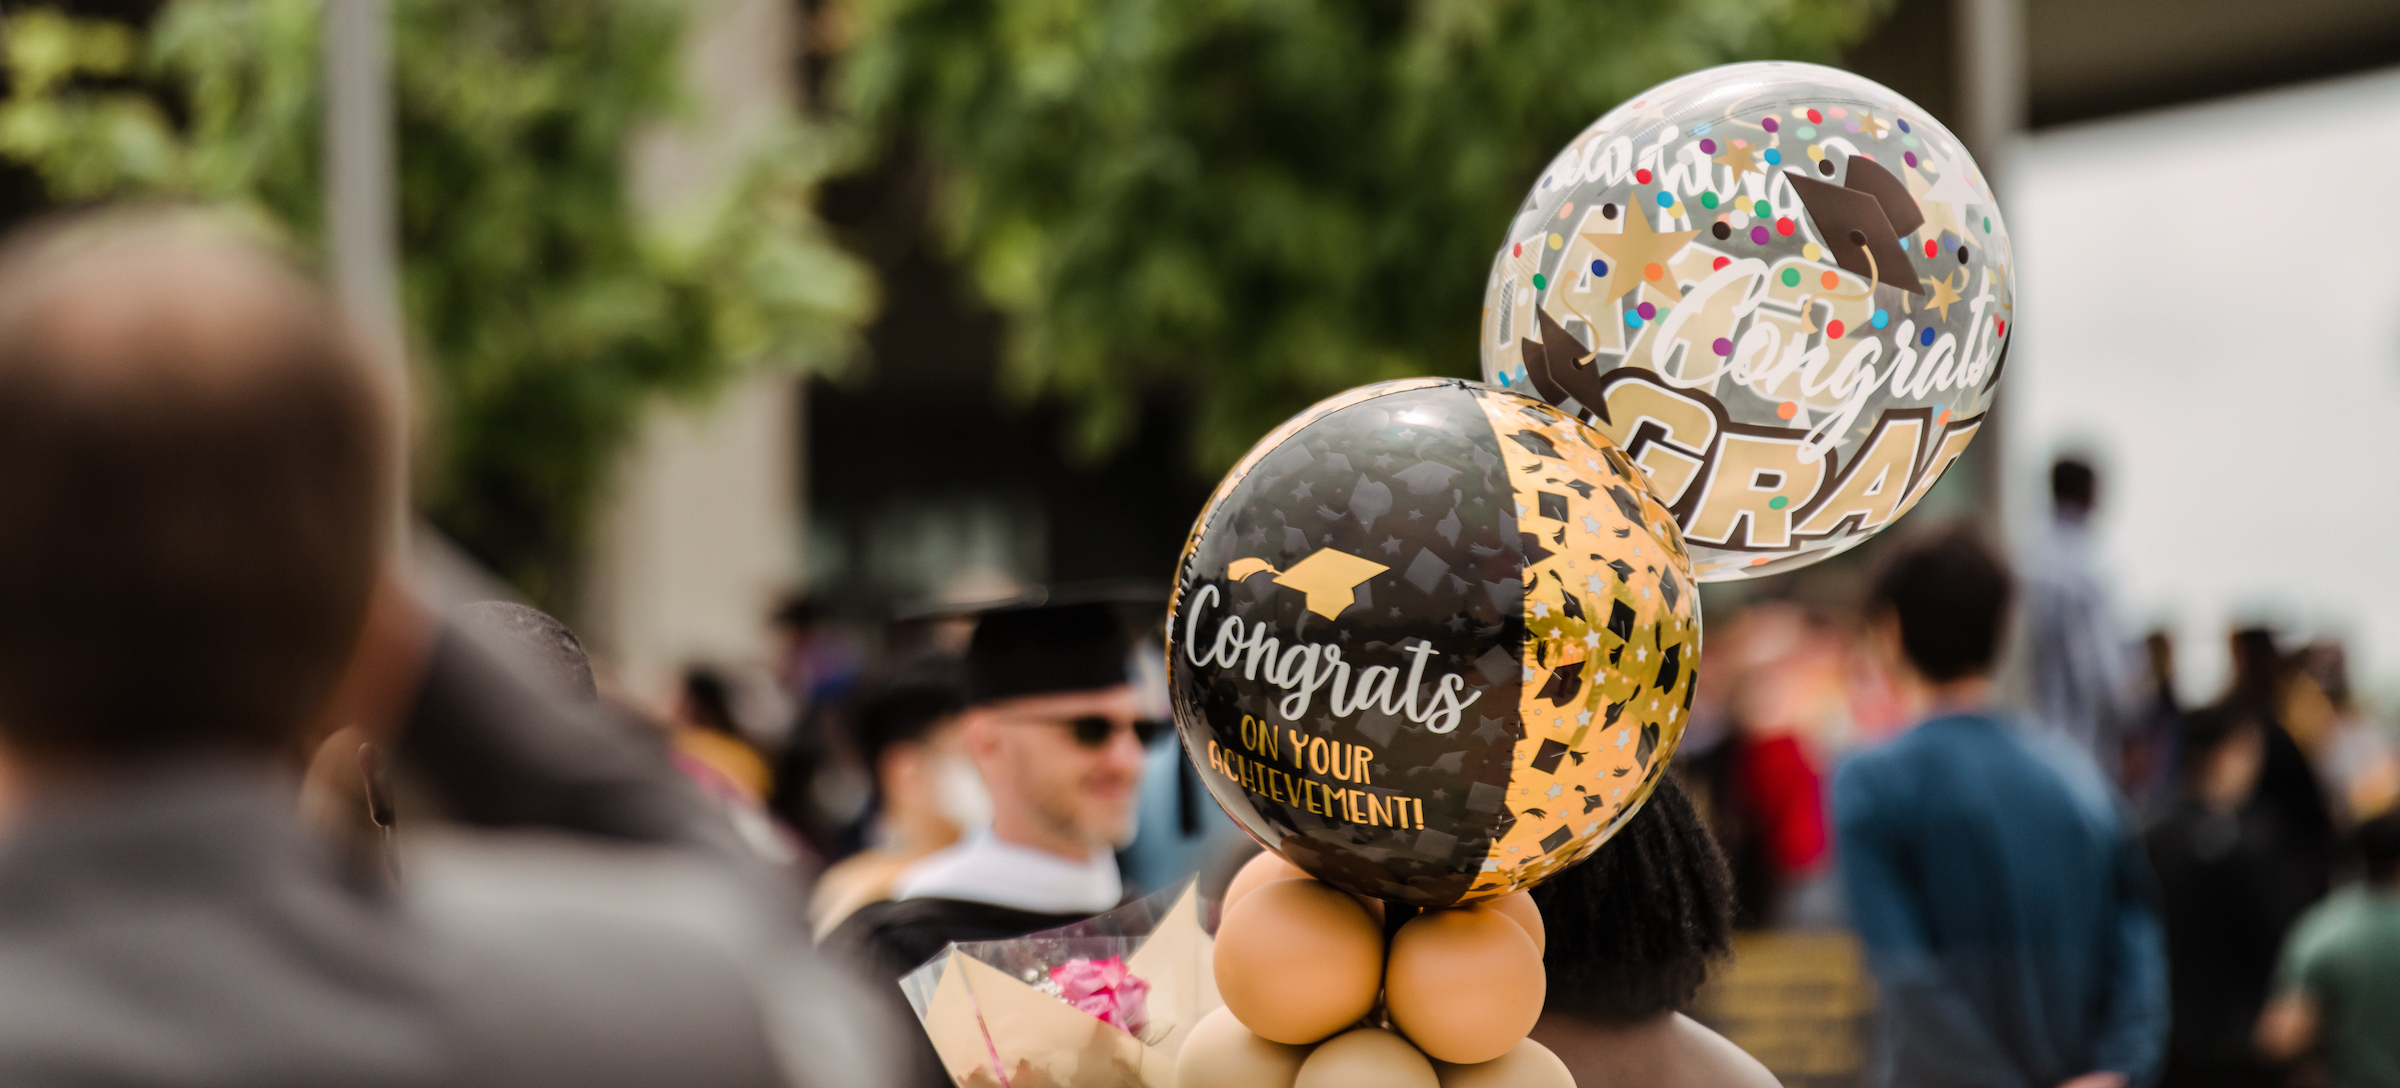 Gold and black balloons read "Congrats Grad" and "Congratulations on your achievements"